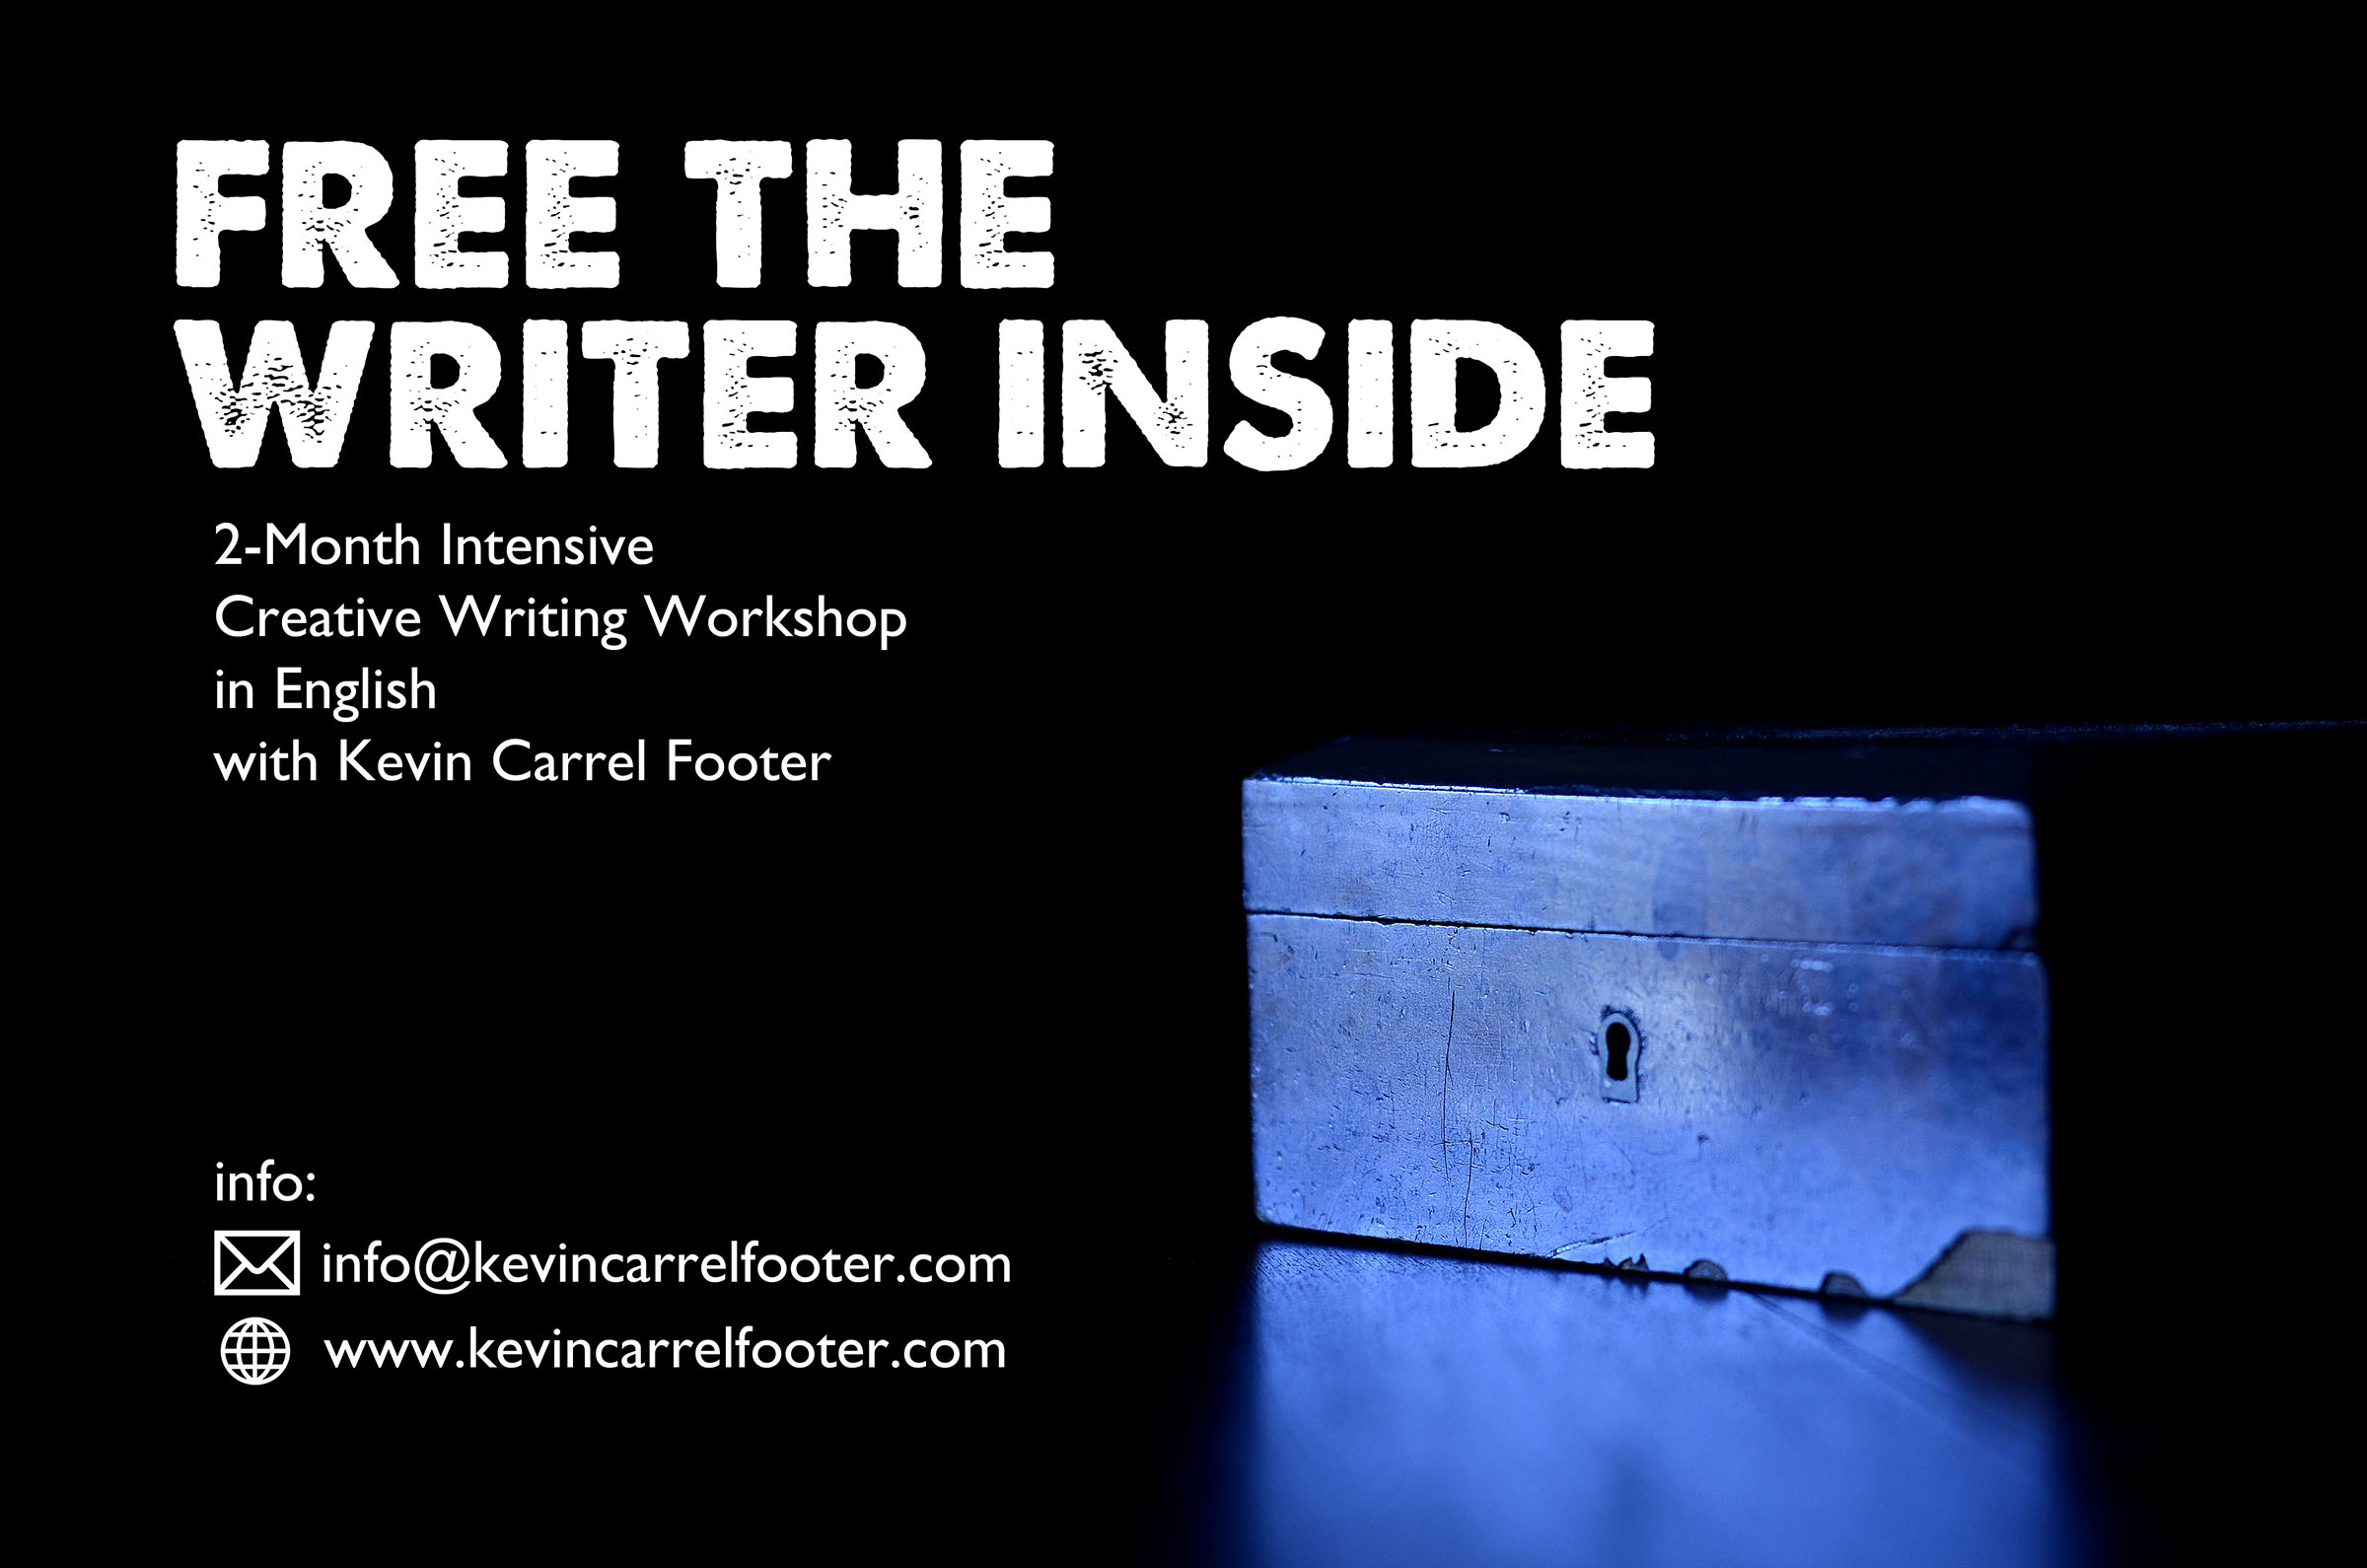 FREE THE WRITER INSIDE